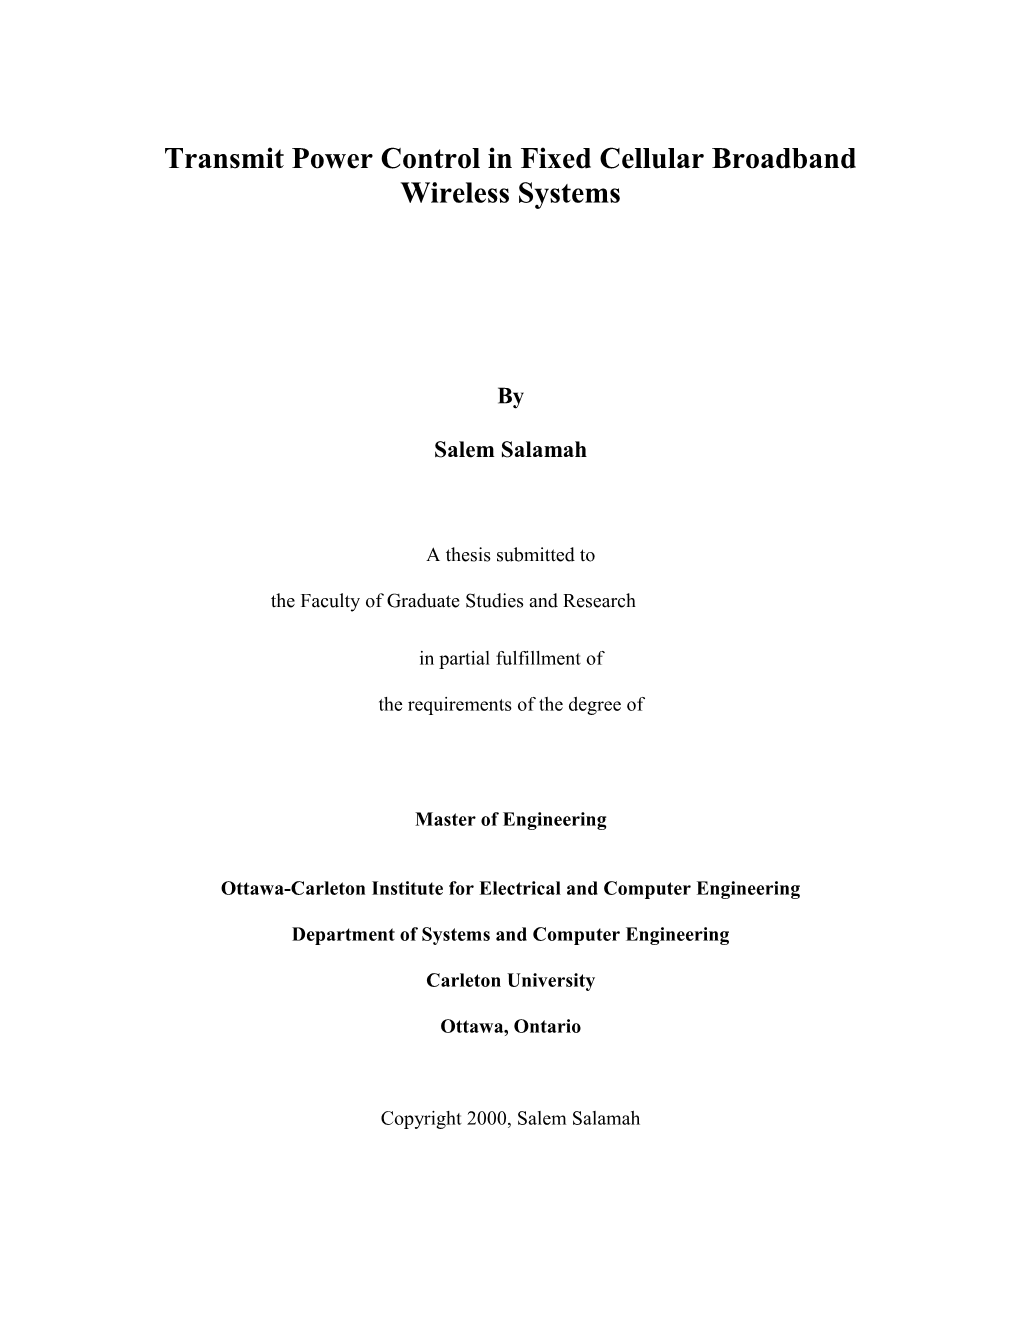 Transmit Power Control in Fixed Cellular Broadband Wireless Systems